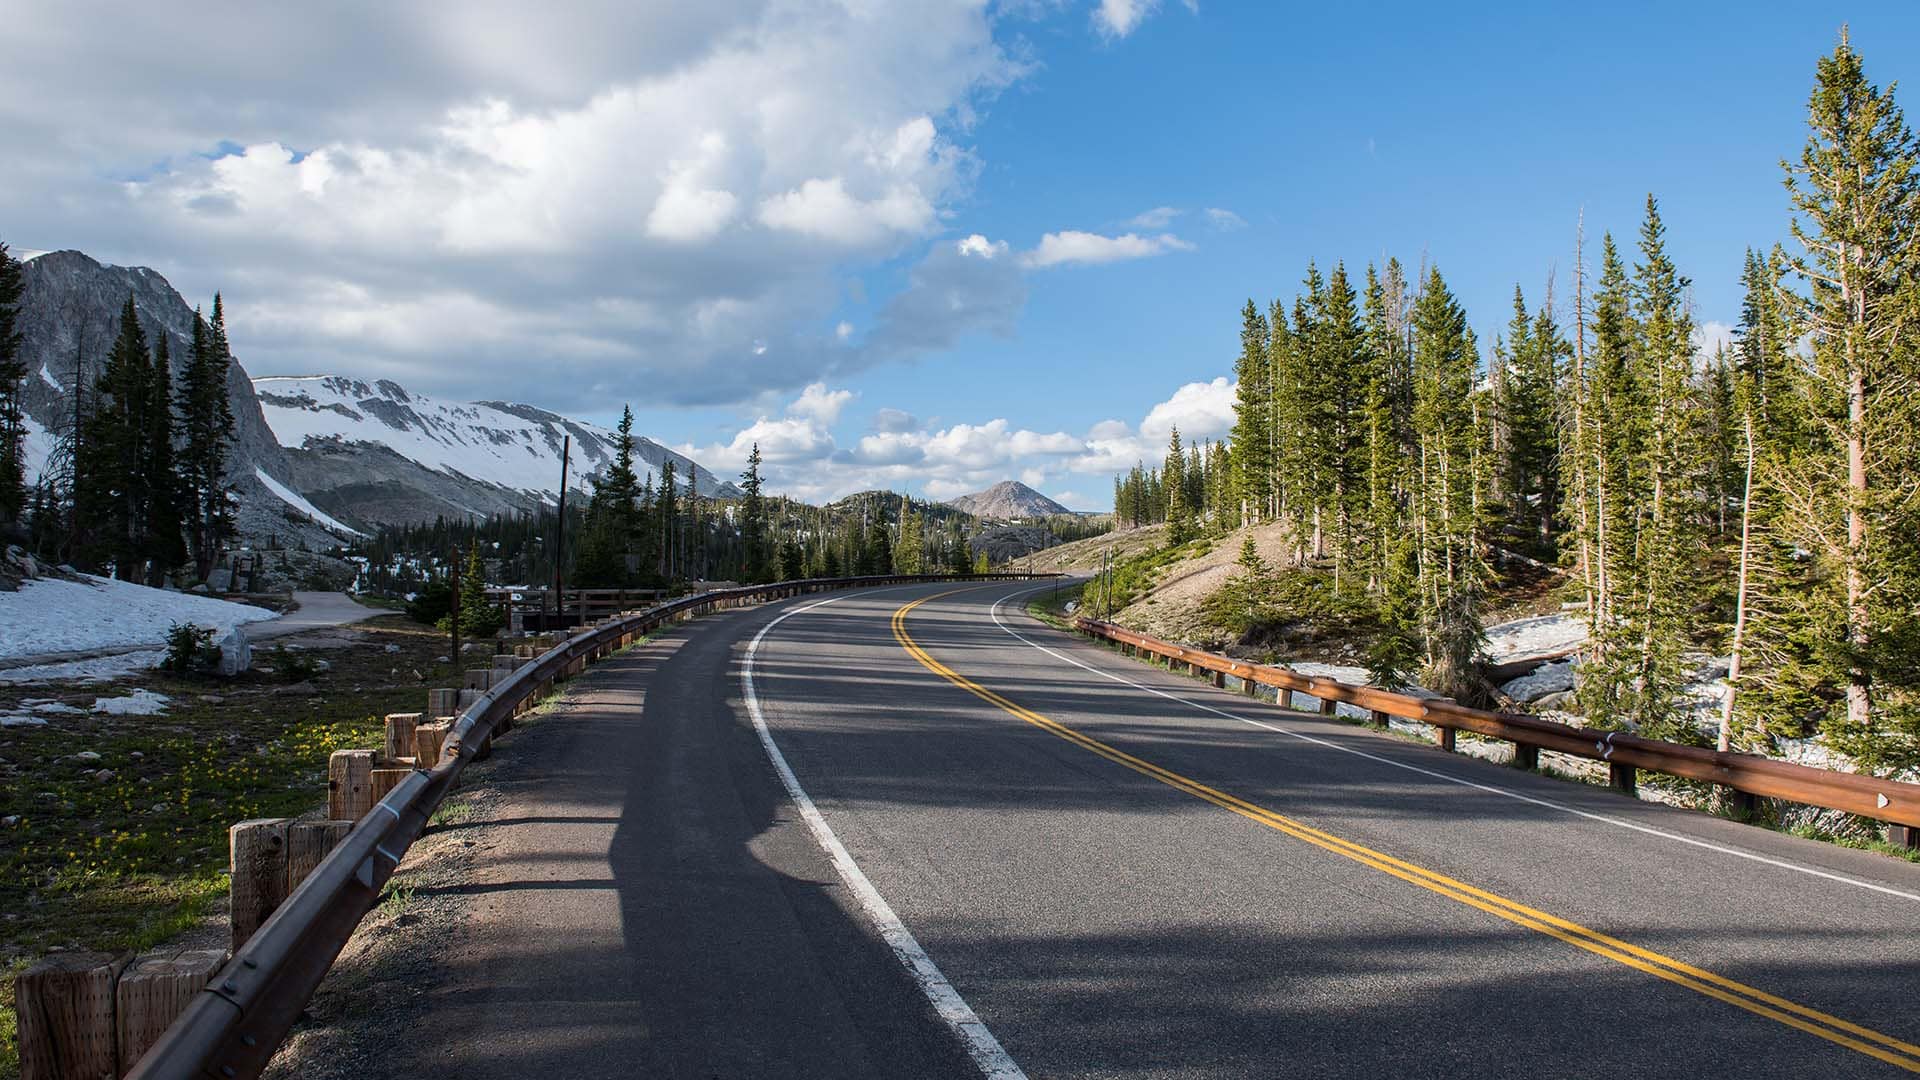 The 50-kilometre-long Snowy Range Scenic Byway takes drivers through dense forests and alpine tundra.